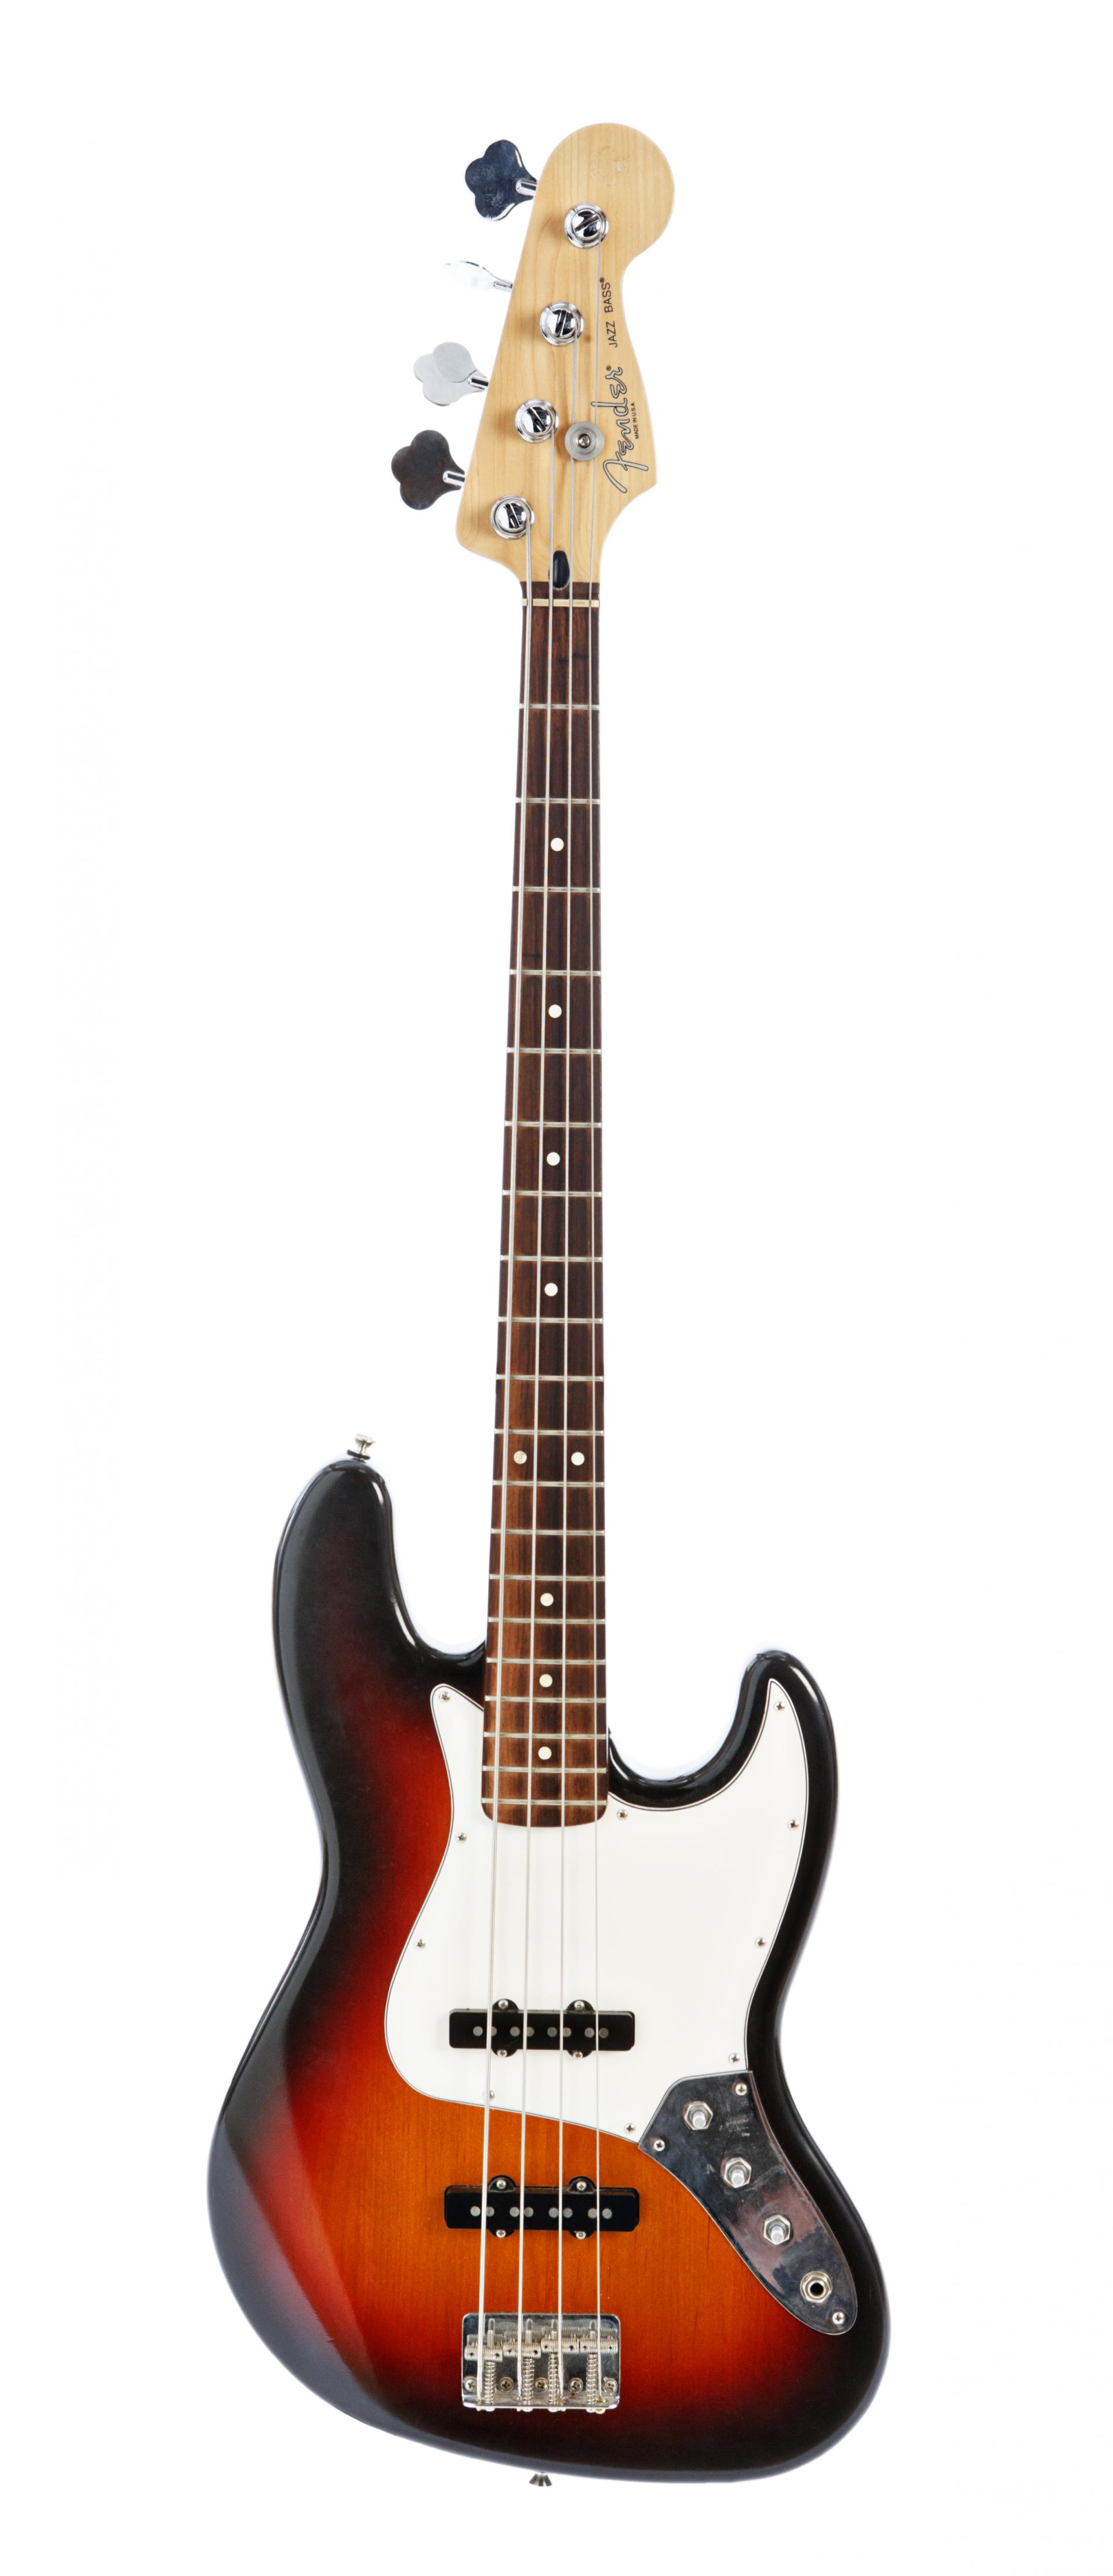  4 String Bass Guitar, Left Handed, Cherry Red